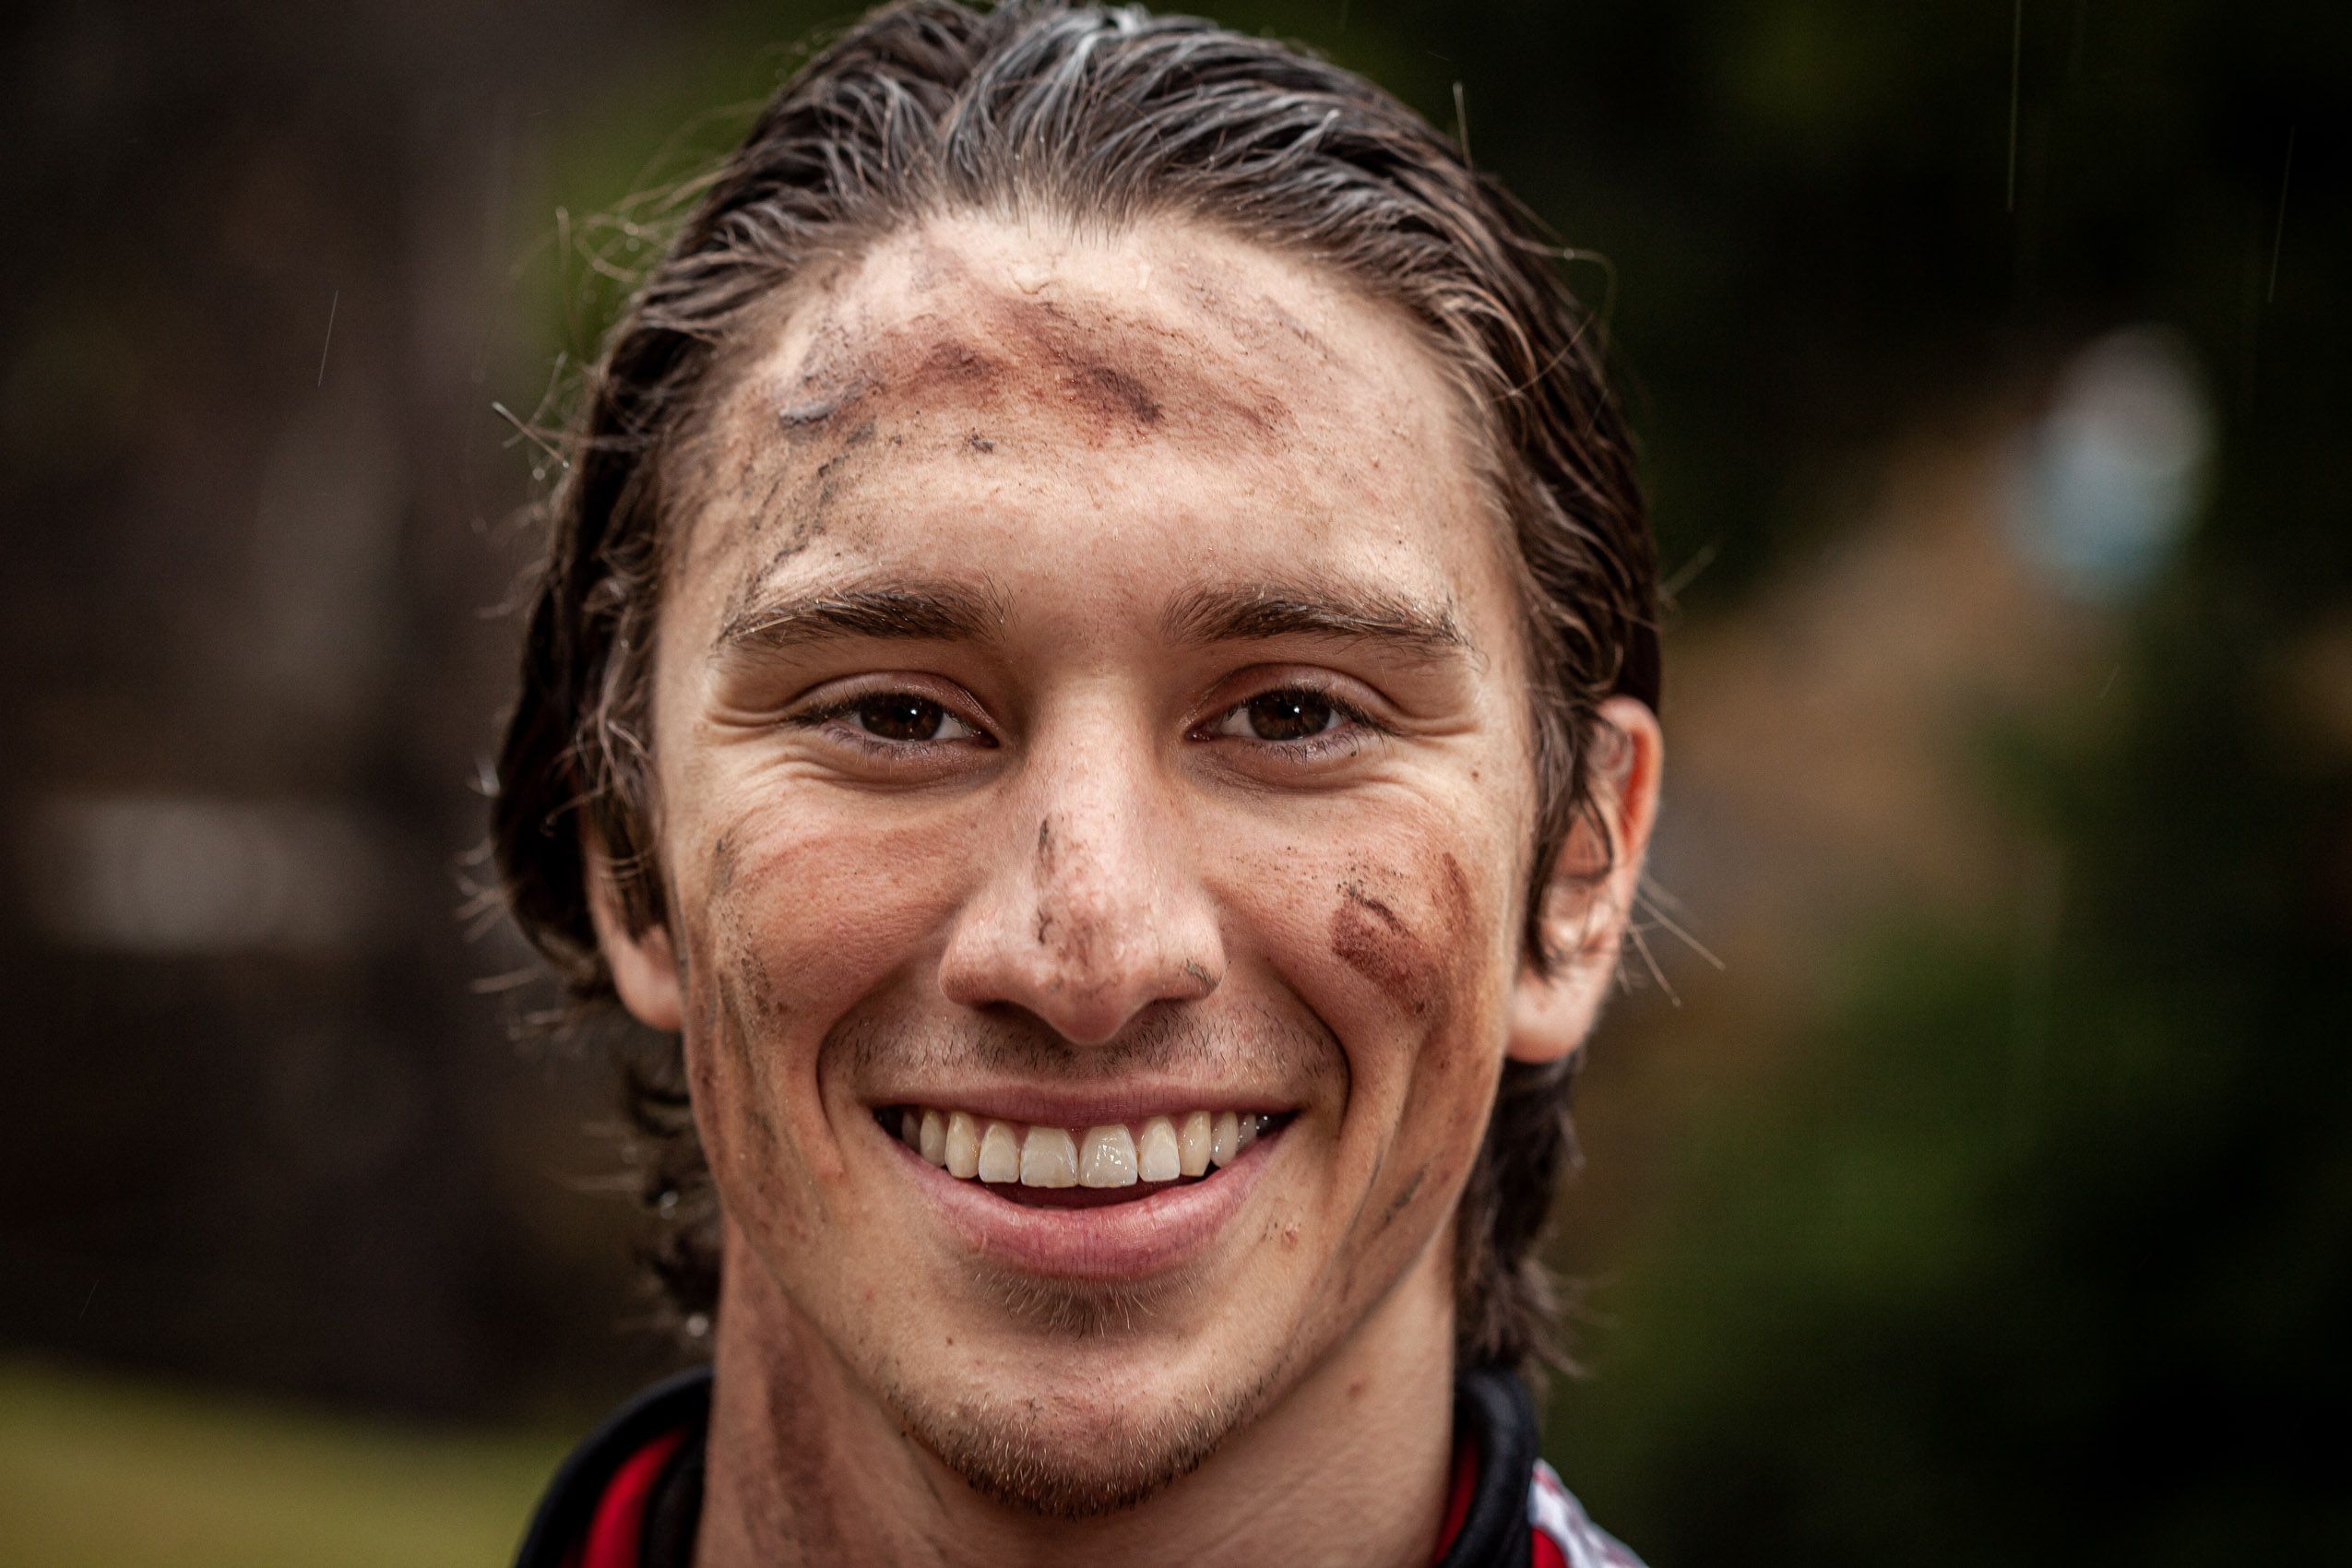 Man Smiling with Mud on Face